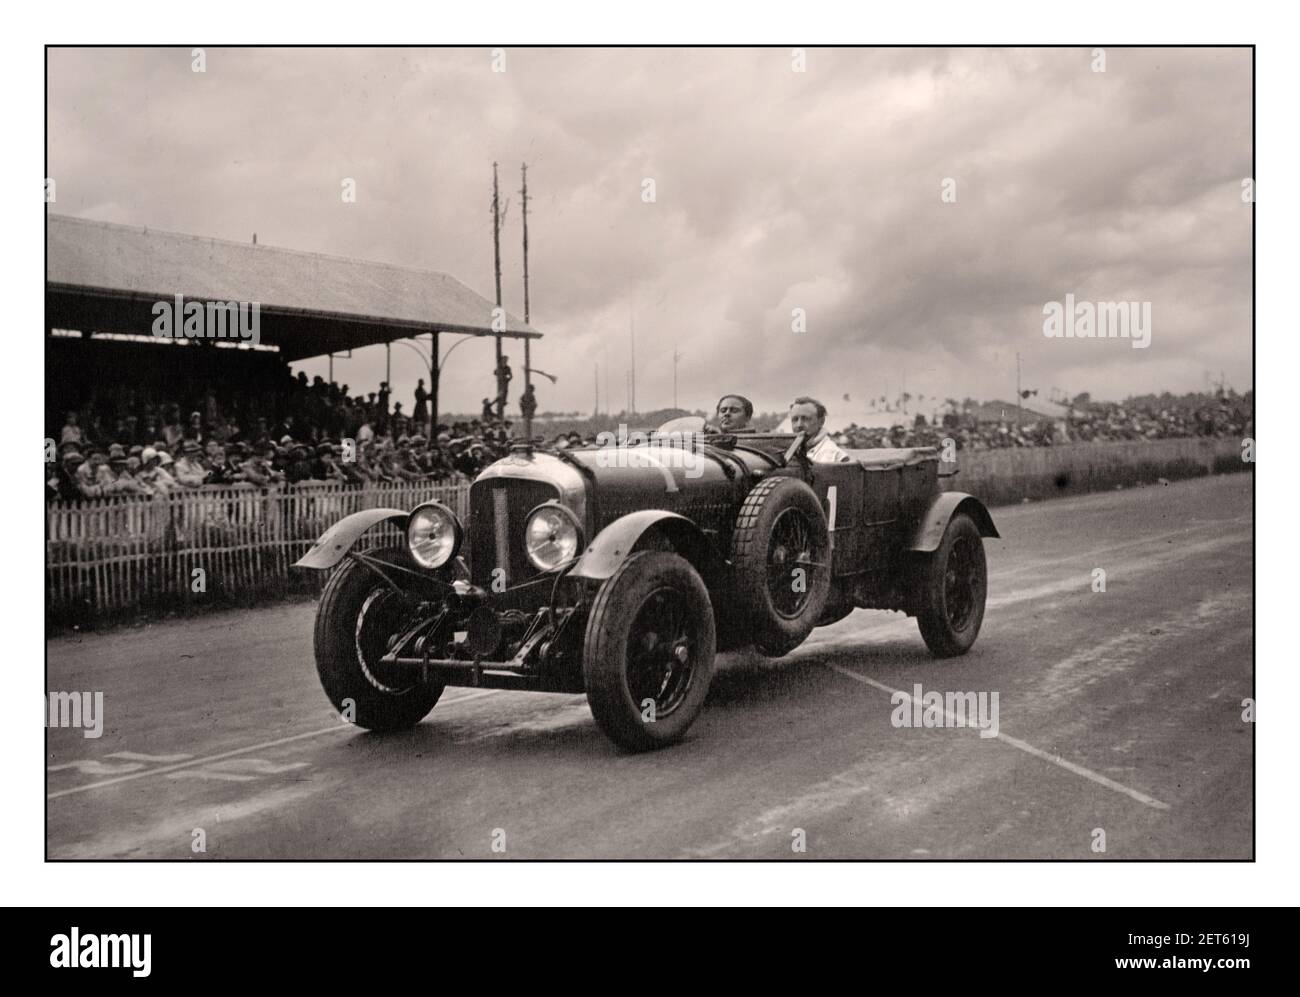 LE MANS 1929 vintage ‘Bentley Boys’ photo winner Bentley 1 Speed 6 of Barnato & Birkin at the 1929 24 hours of Le Mans 24 Hrs France.The No.1 Speed Six of Captain Woolf 'Babe' Barnato,  and Sir Henry 'Tim' Birkin, who was probably the fastest of the Bentley Boys, covered 2,843 kilometres with an average speed of  118.492 kph claiming its fourth victory, and third in a row, for the British marque Stock Photo